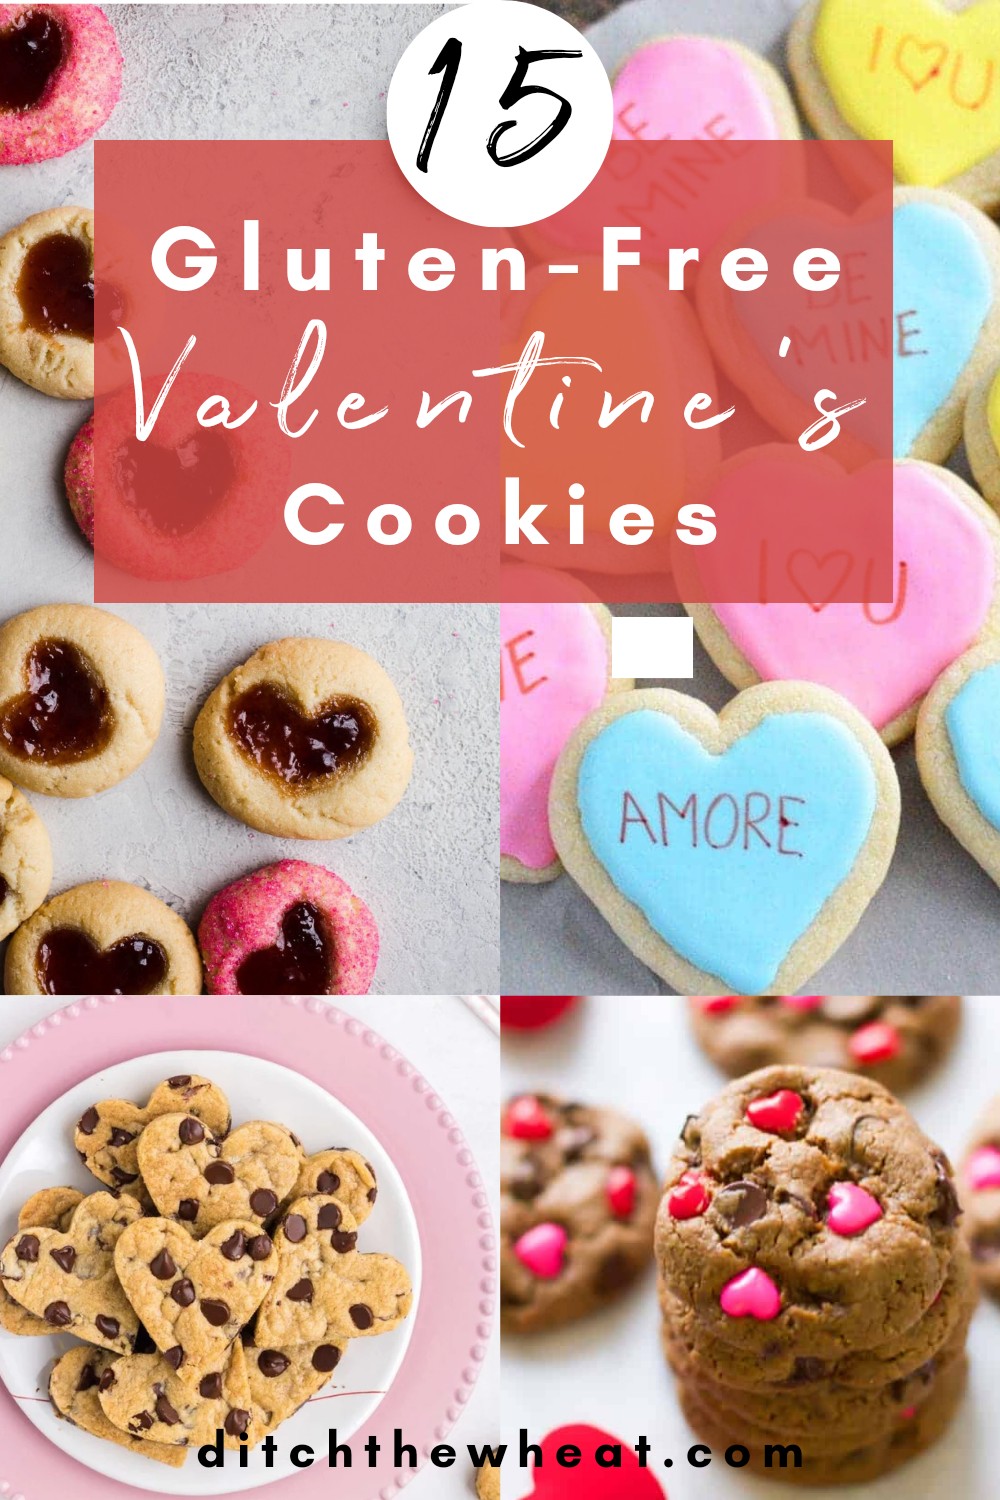 A collage of 4 different gluten free Valentine's cookies.